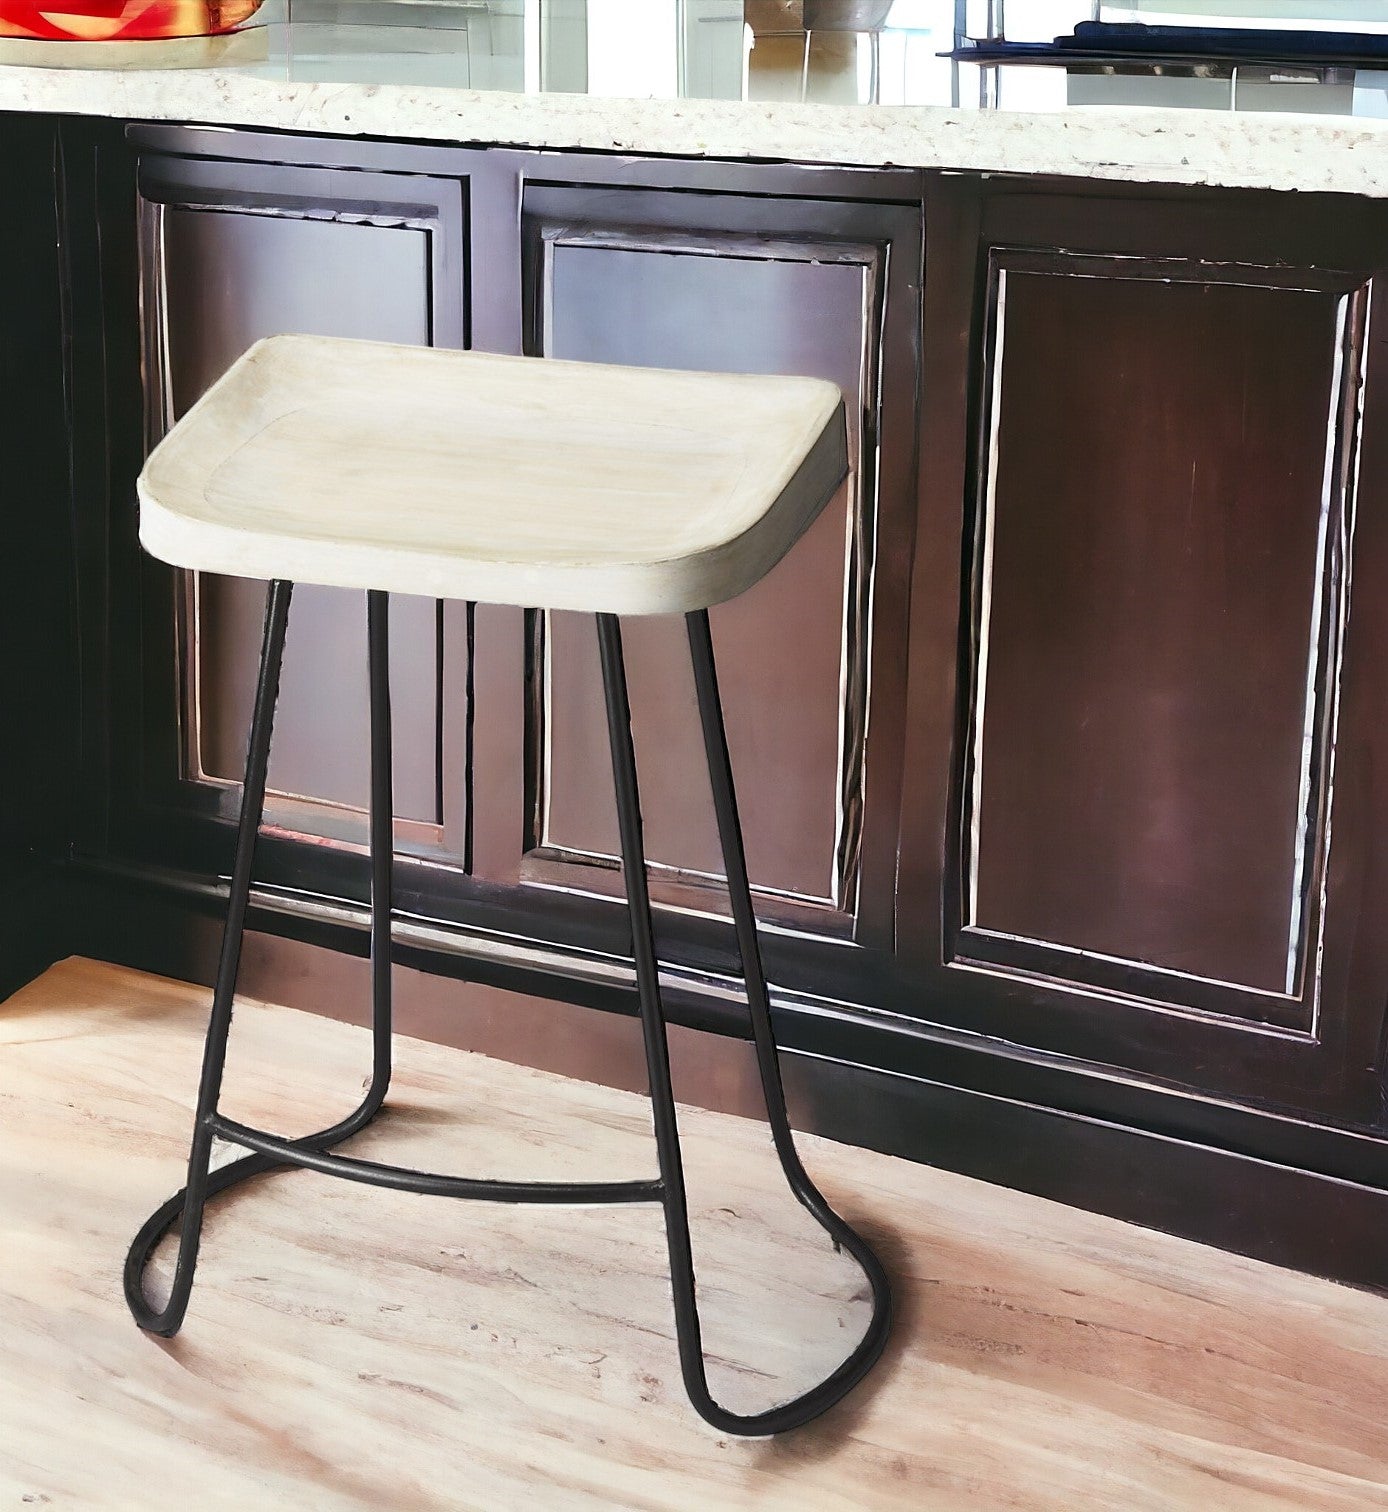 21" Off White And Black Manufactured Wood And Iron Backless Counter Height Bar Chair